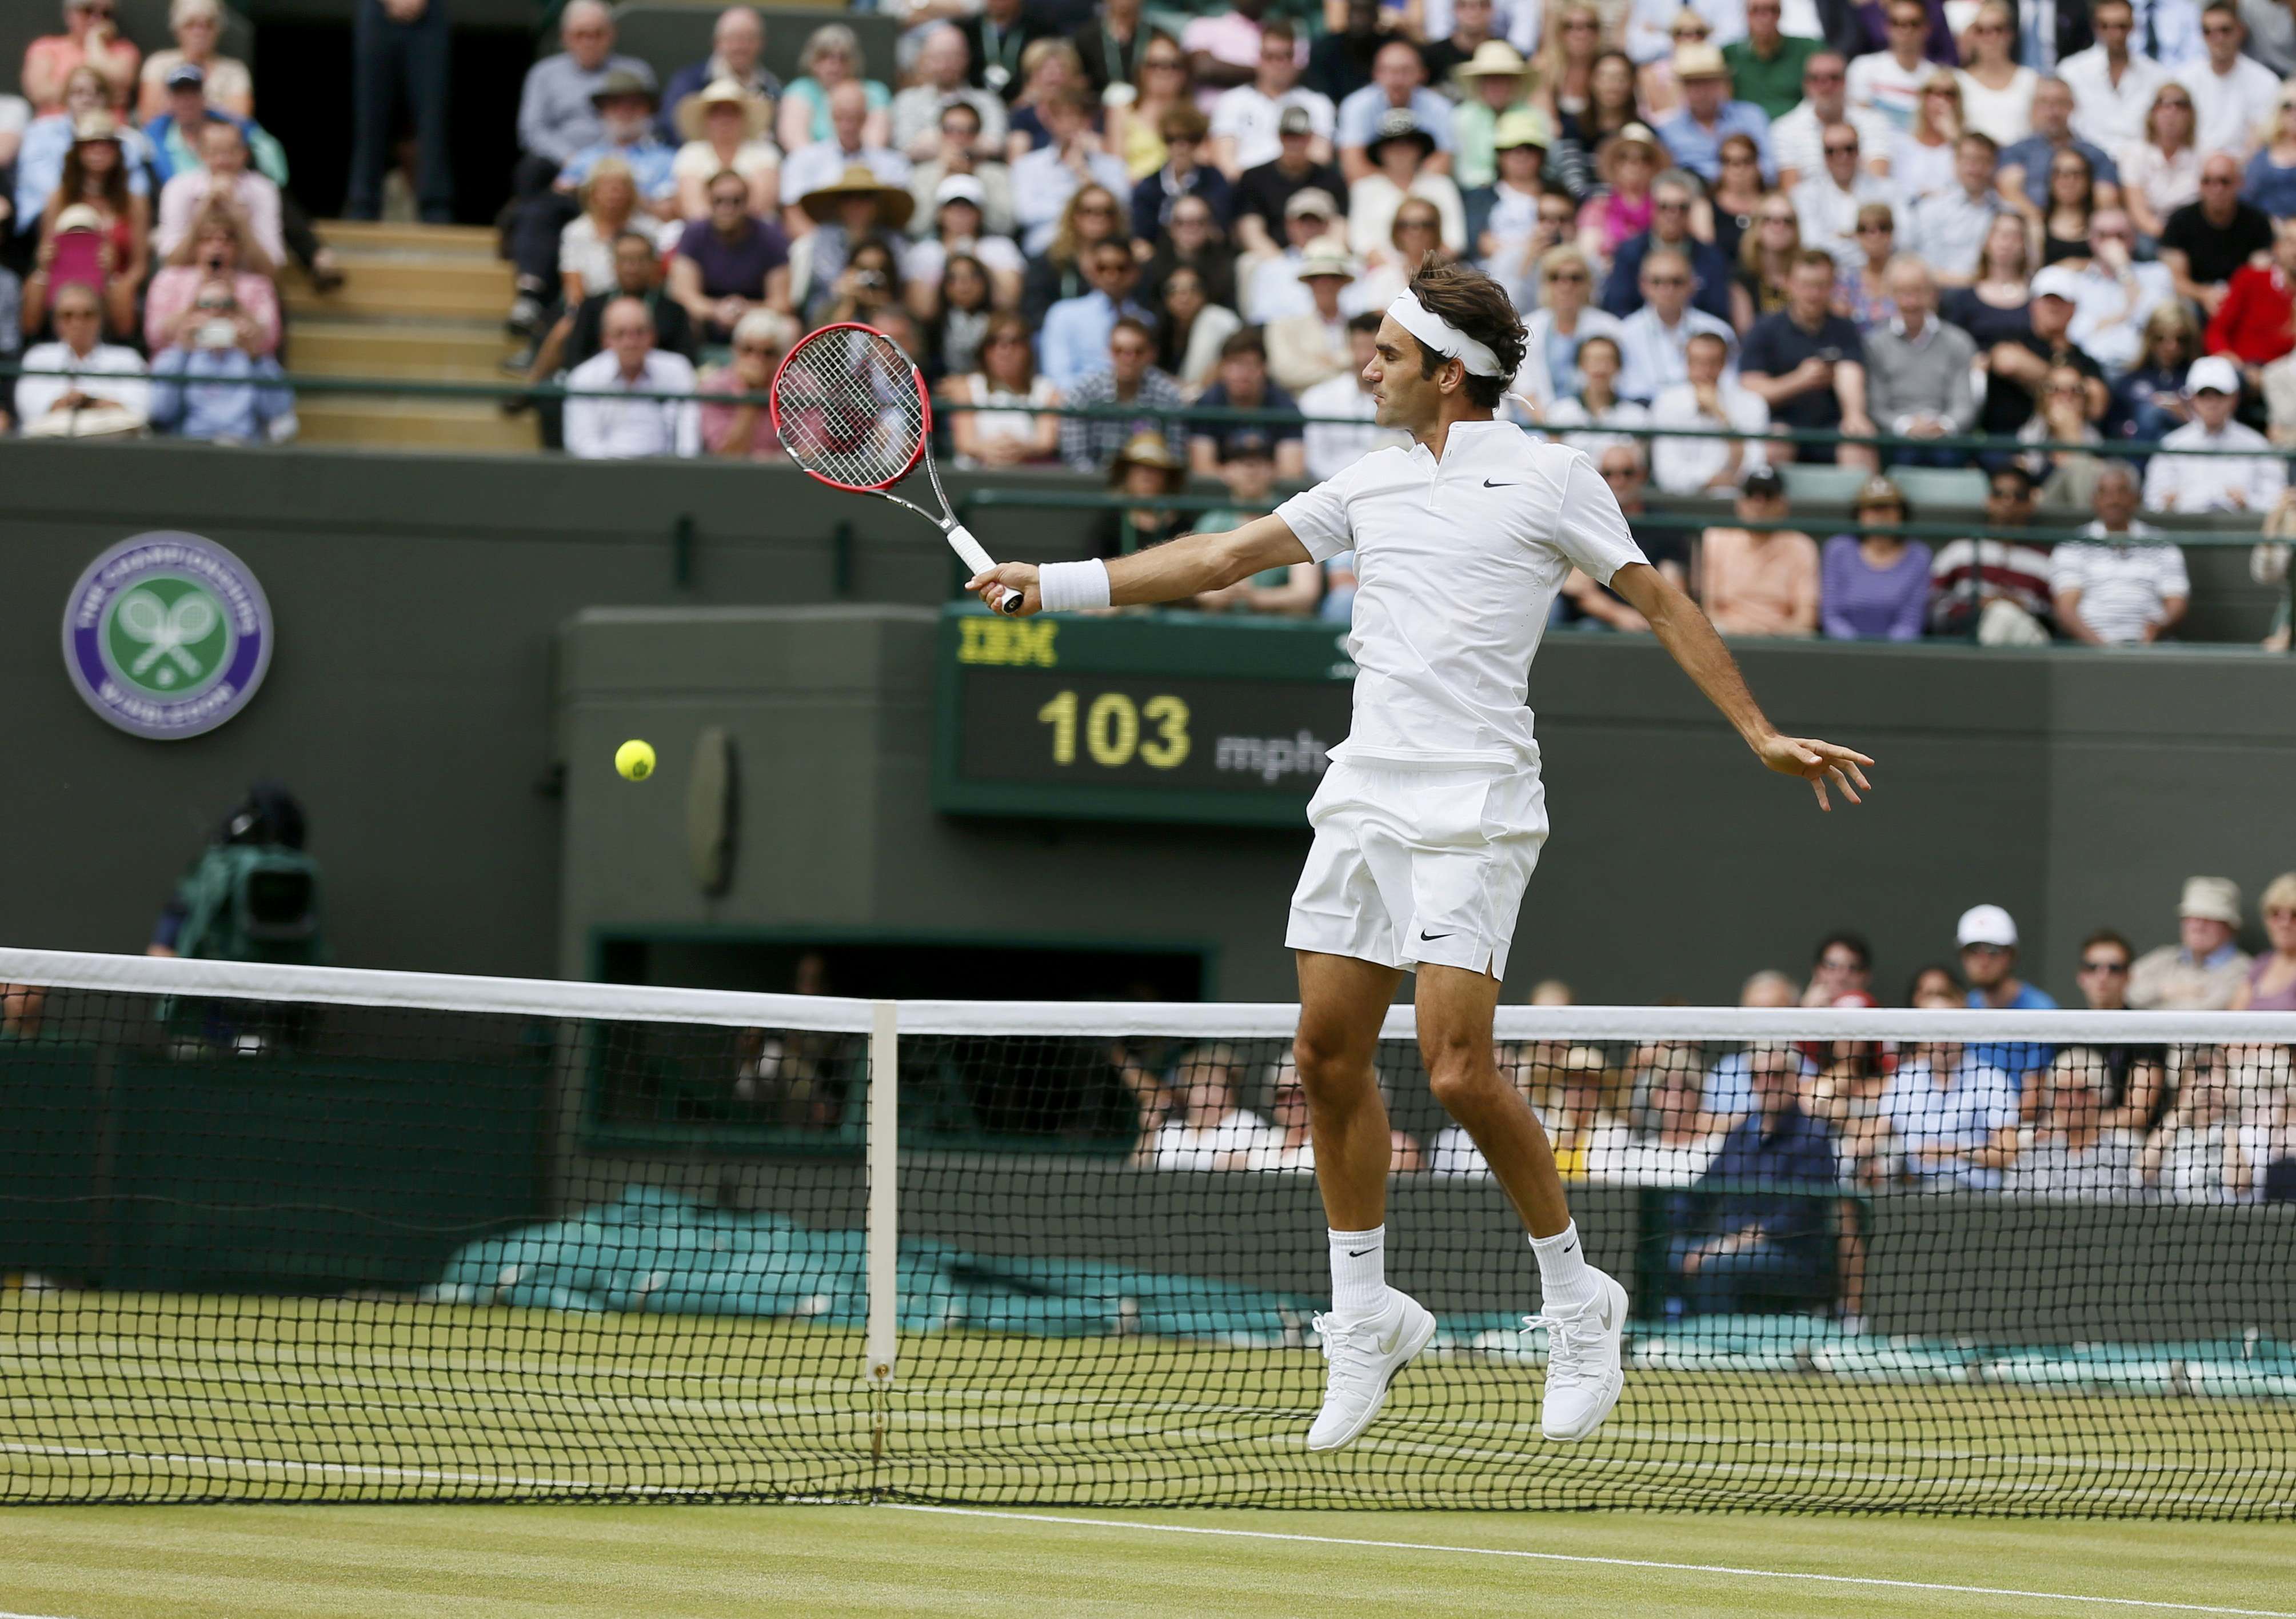 Roger Federer of Switzerland hits the final shot to win his match against Gilles Simon of France at the Wimbledon Tennis Championships in London, July 8, 2015. REUTERS/Stefan Wermuth